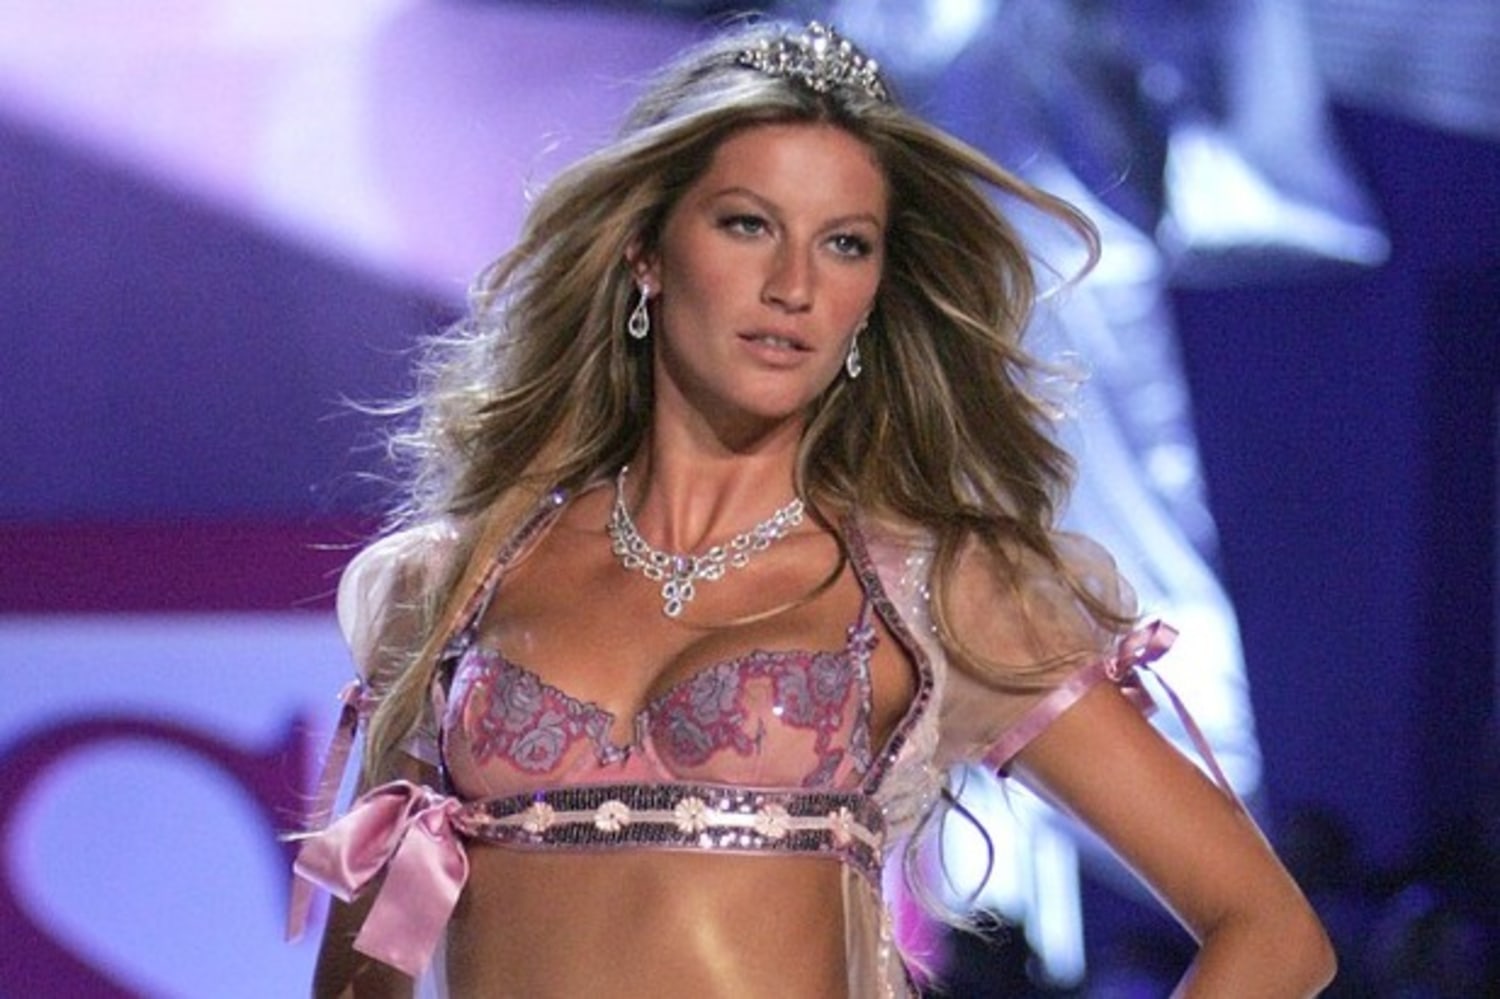 The world's highest-paid models